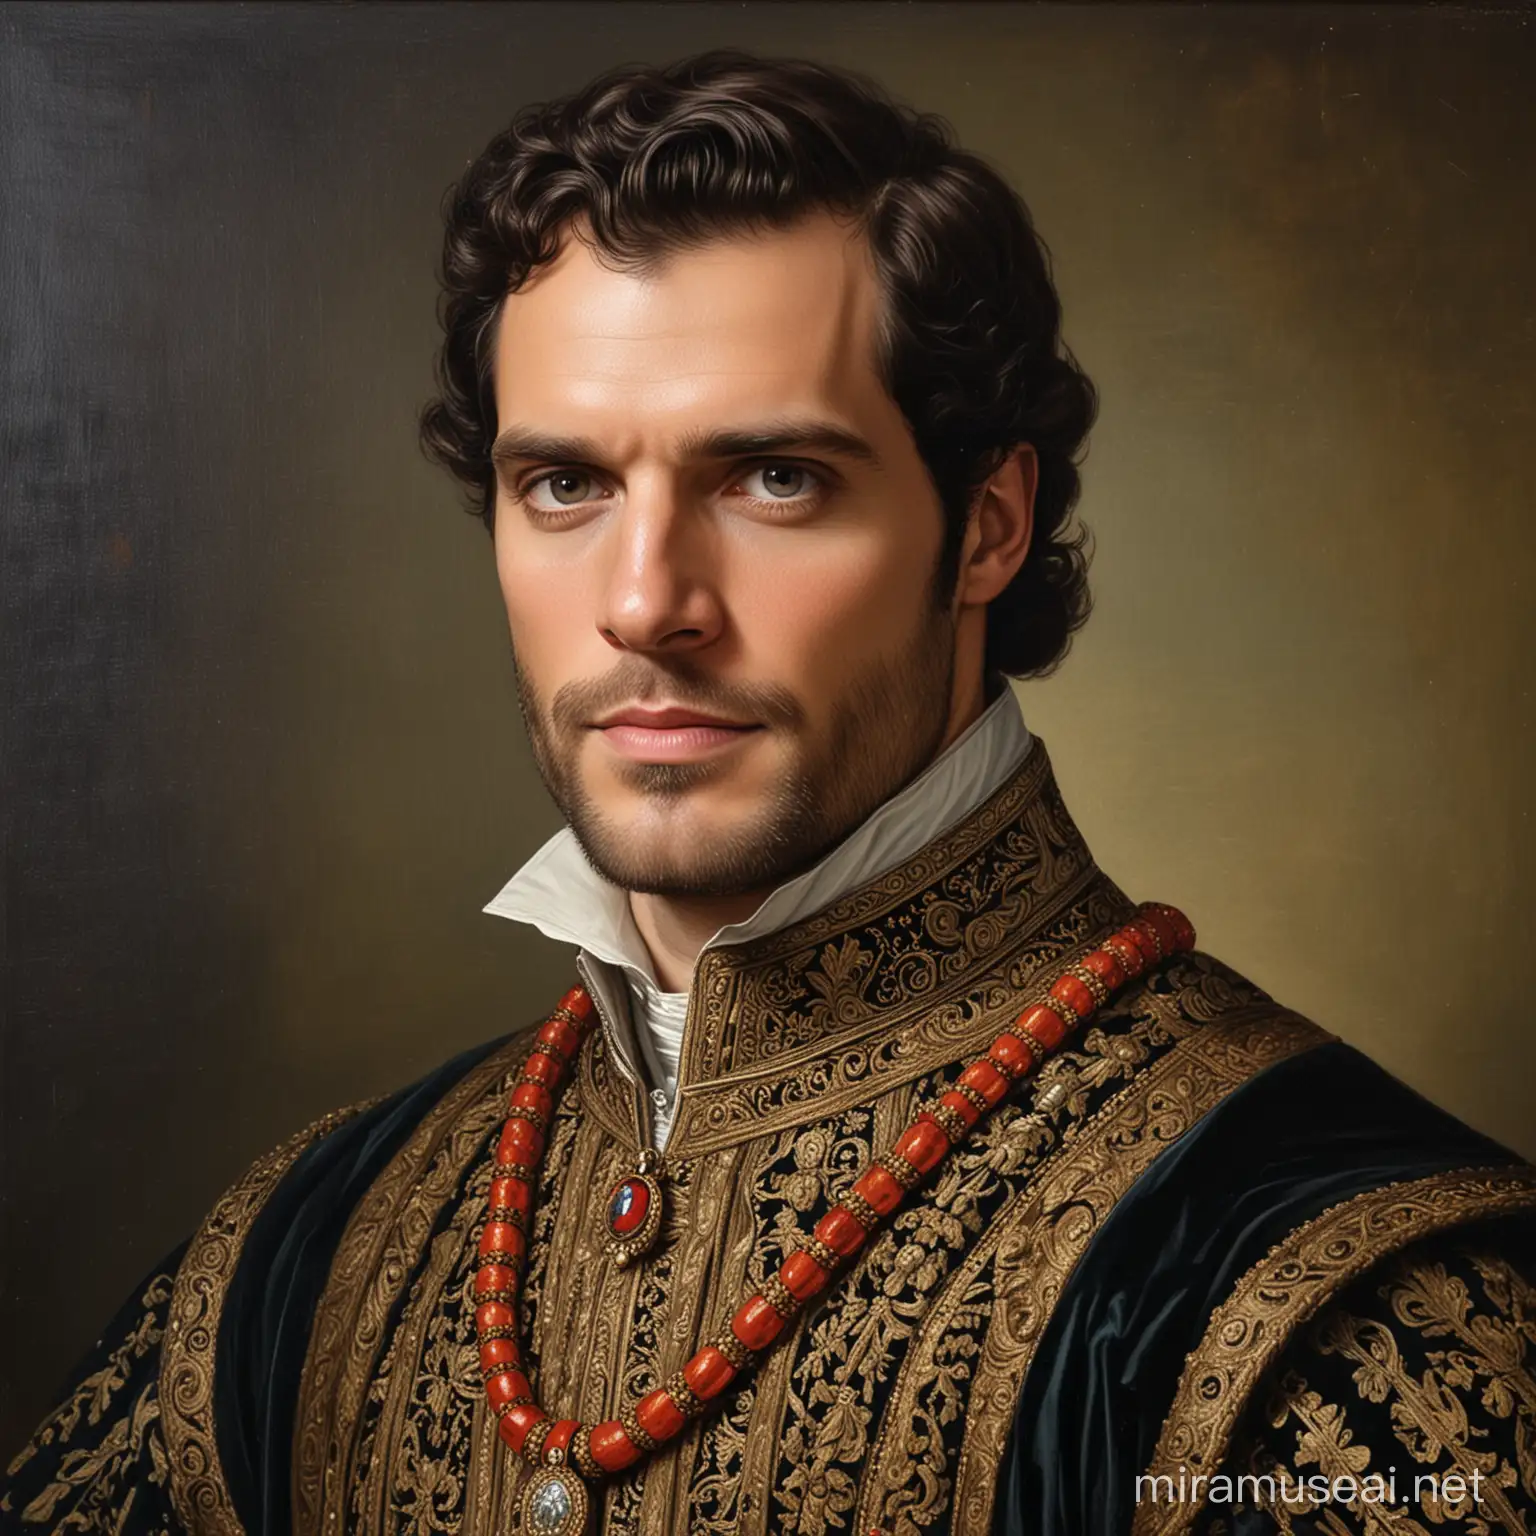 16th century oil painting, portrait of  actor Henry Cavill dressed as a nobleman